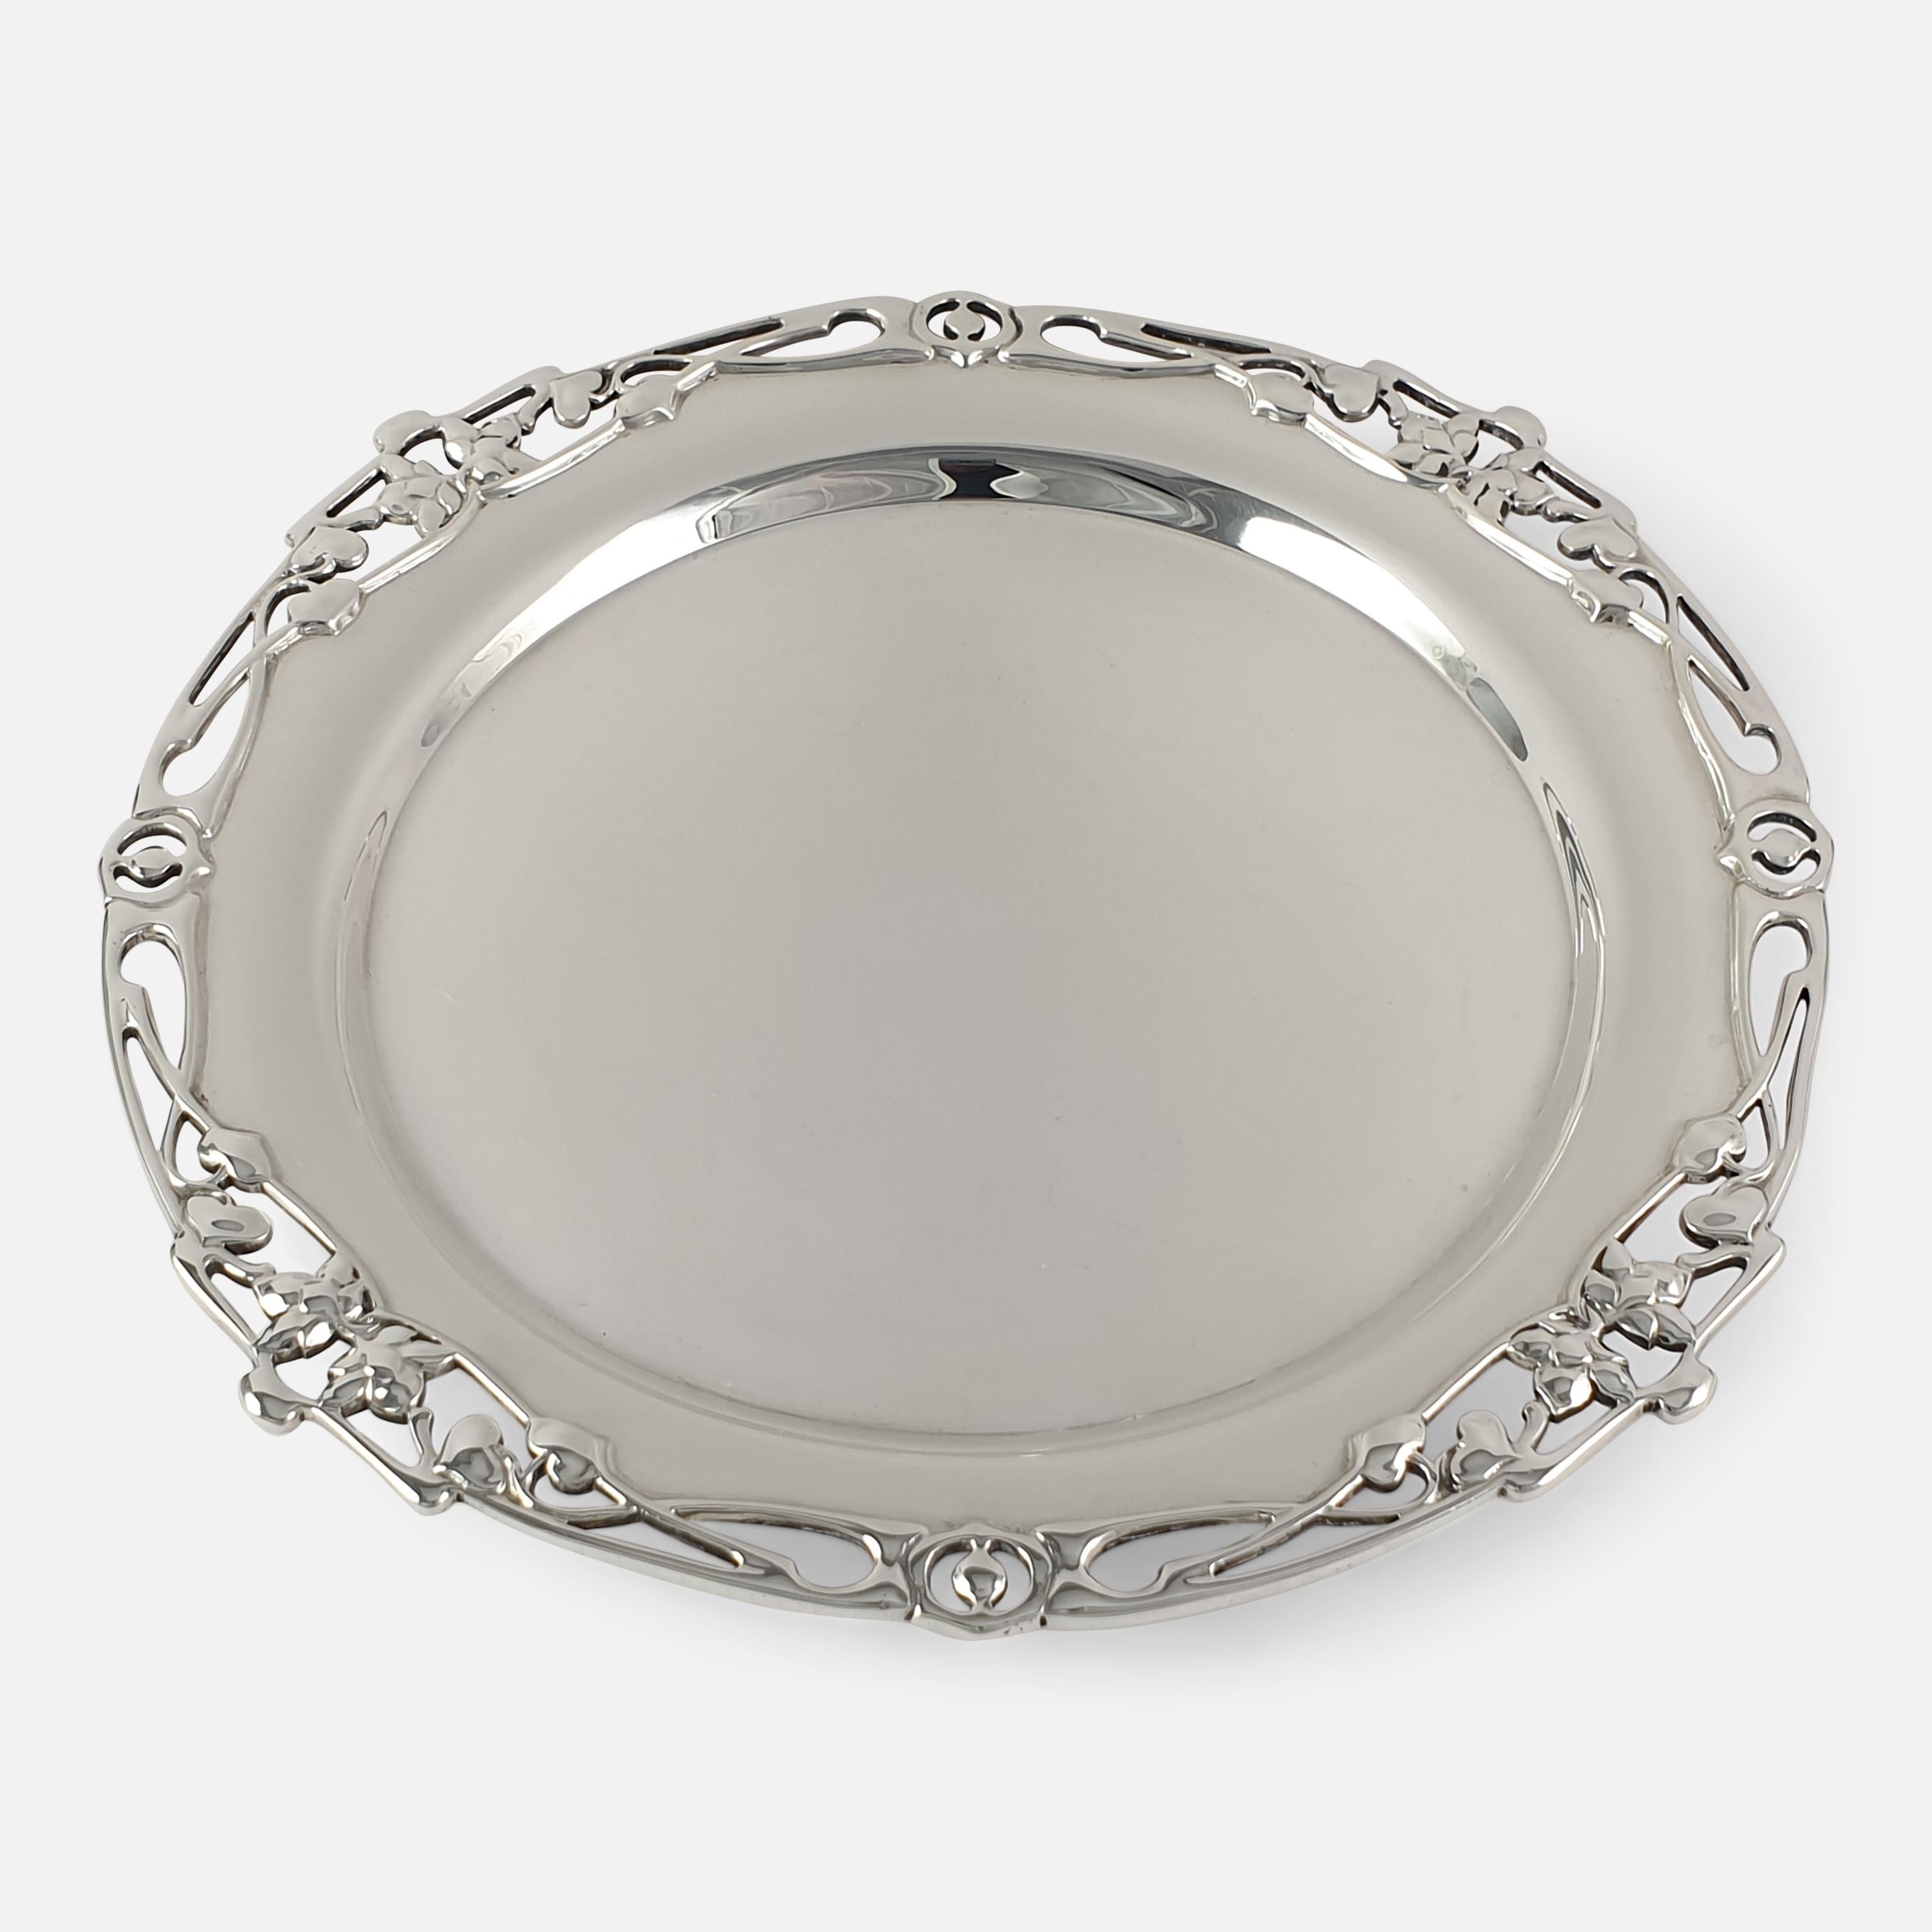 An Edwardian Art Nouveau silver salver by William Hutton & Sons, Sheffield, 1906. The salver is of circular form, with a pierced foliate border sitting on three feet.

The hallmarks are located to the reverse with the makers mark of William Hutton &